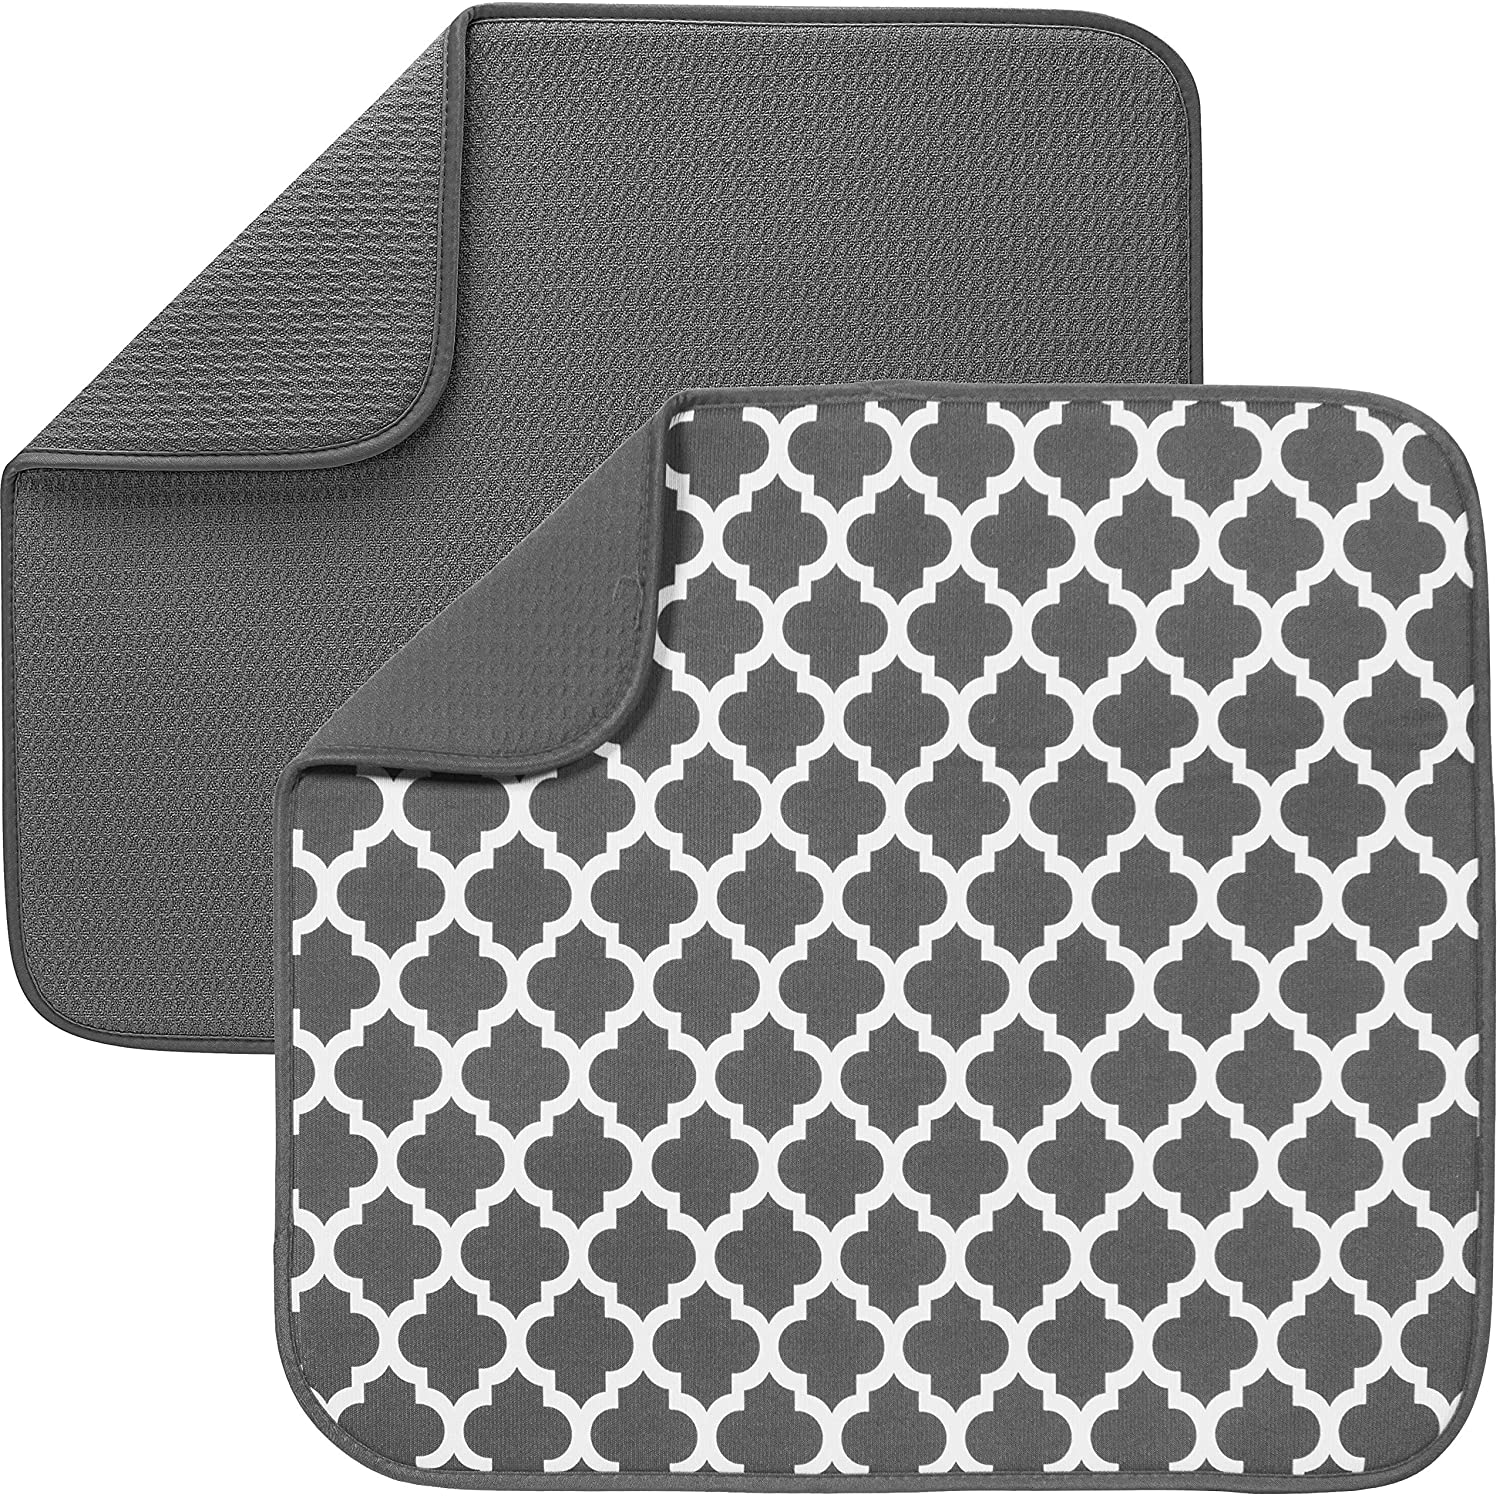 S&T Inc Absorbent Kitchen Counter Mat - Grey with white Tile Pattern